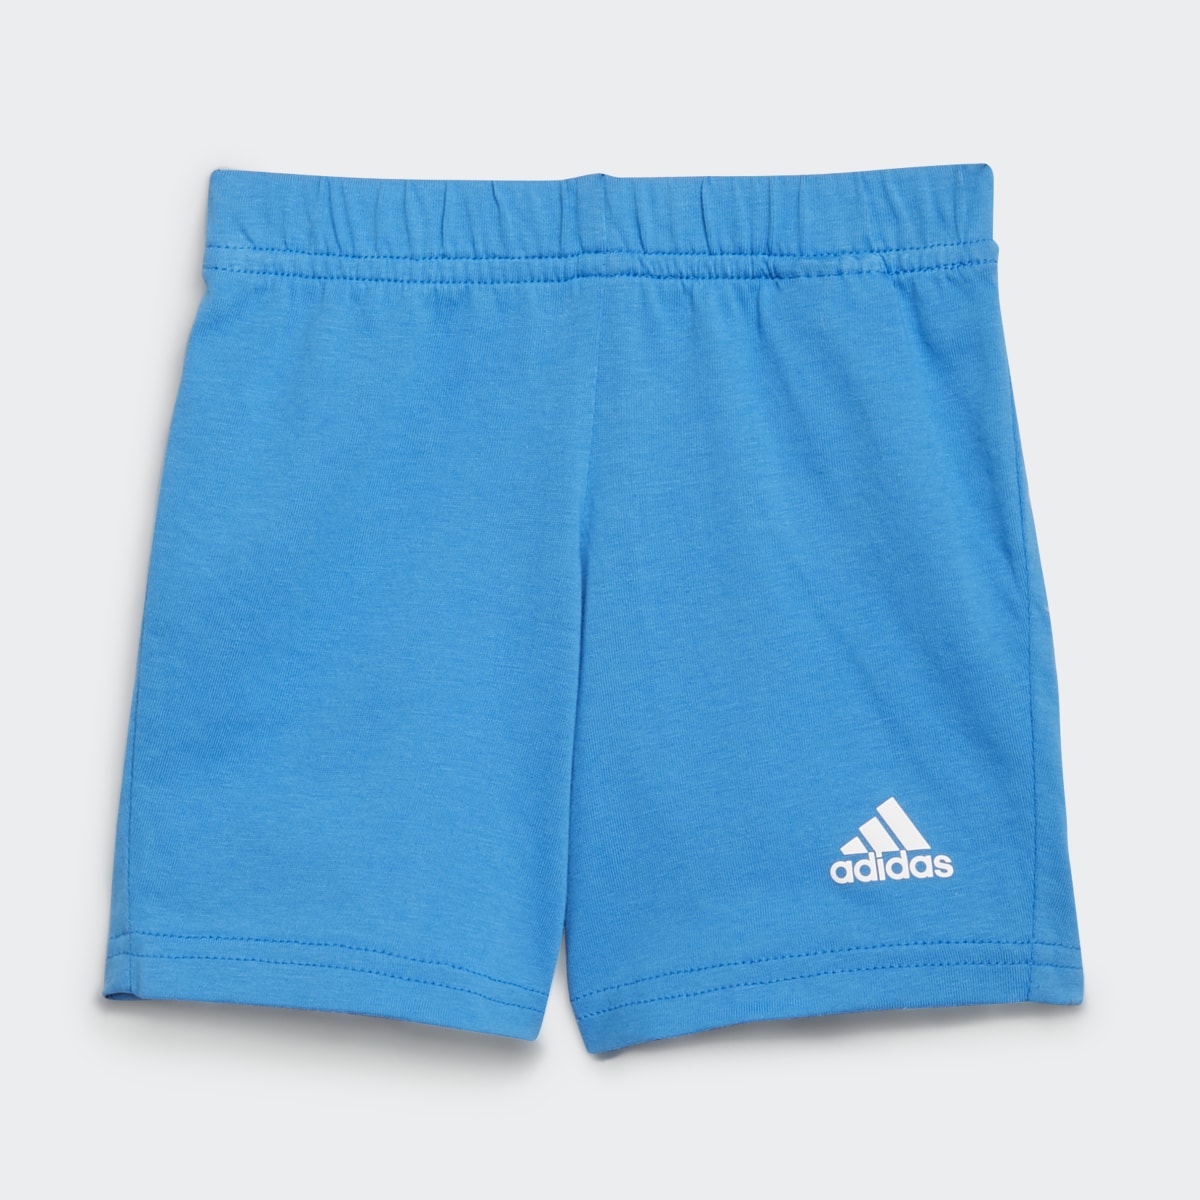 Adidas Completo Essentials Tee and Shorts. 5